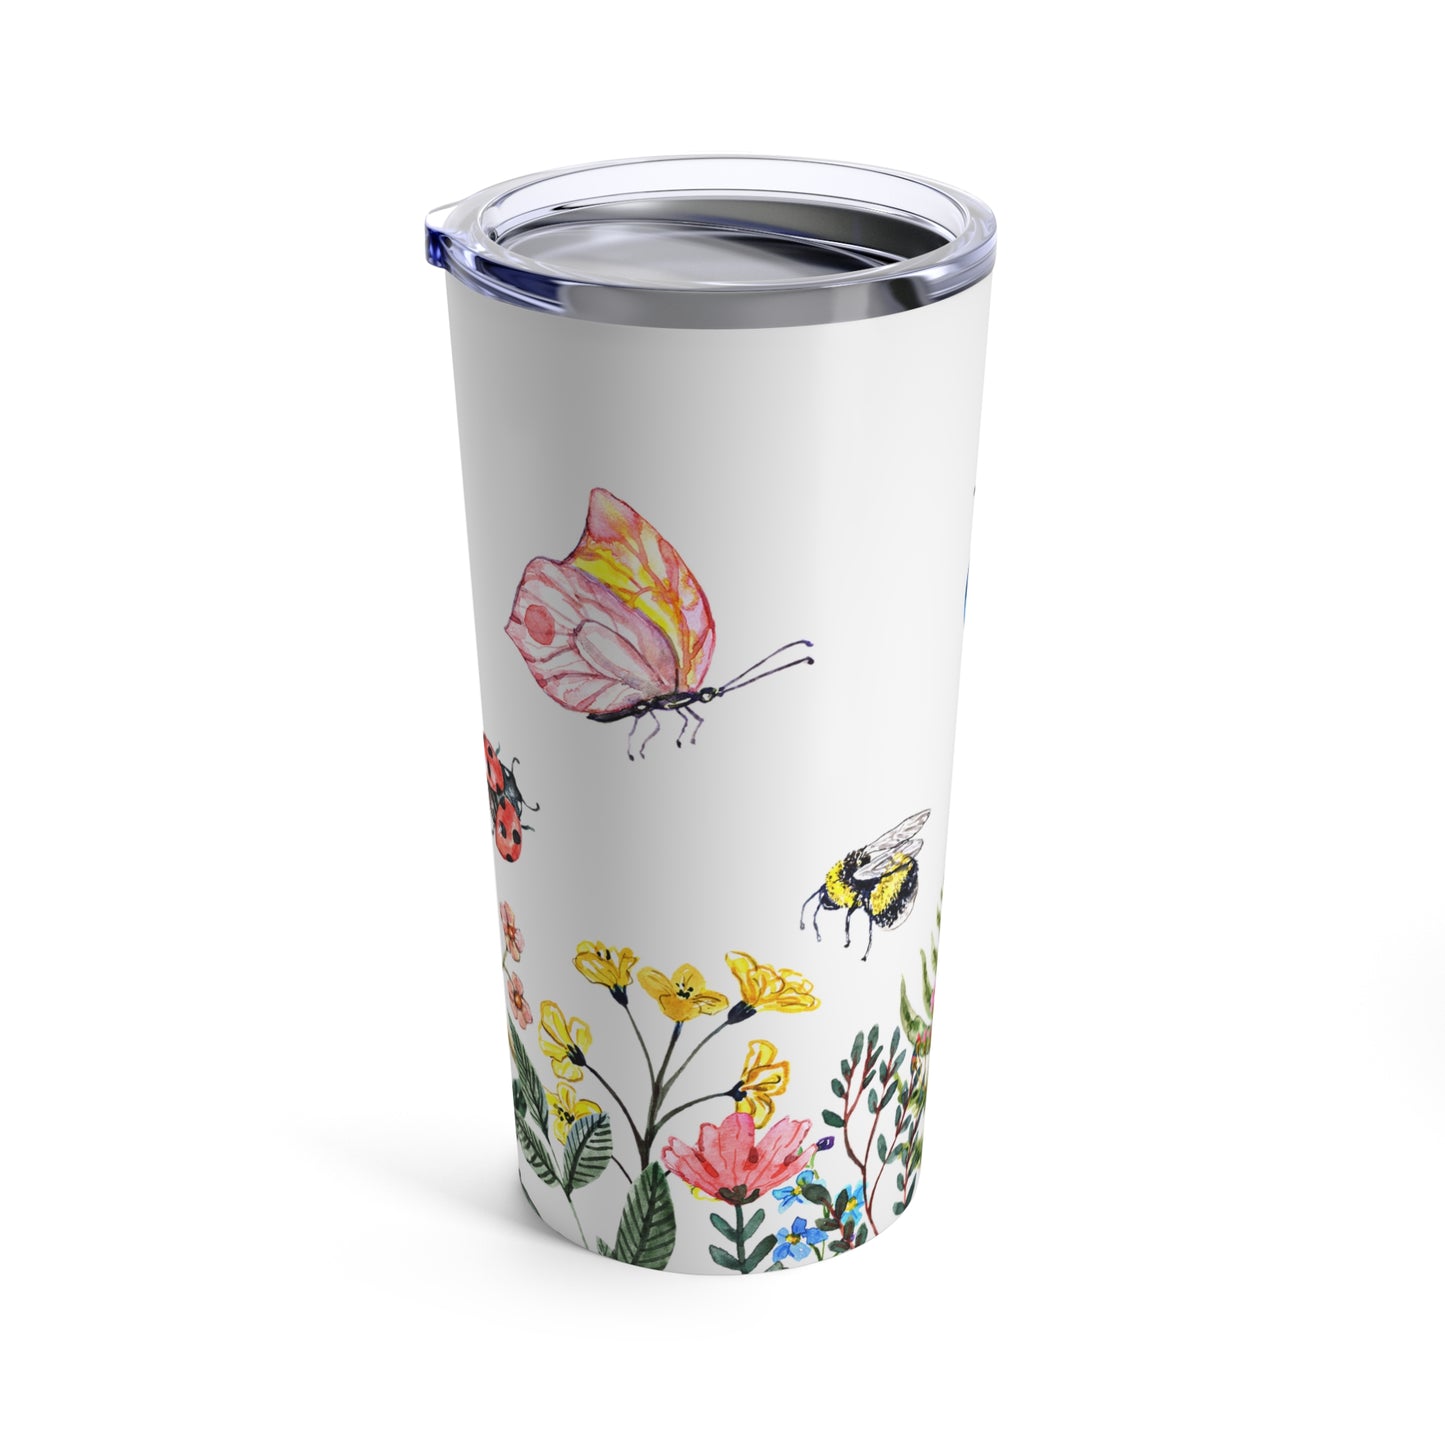 A dishwasher-safe Printify Nature's Garden Tumbler in white stainless steel with butterflies and bees on it.